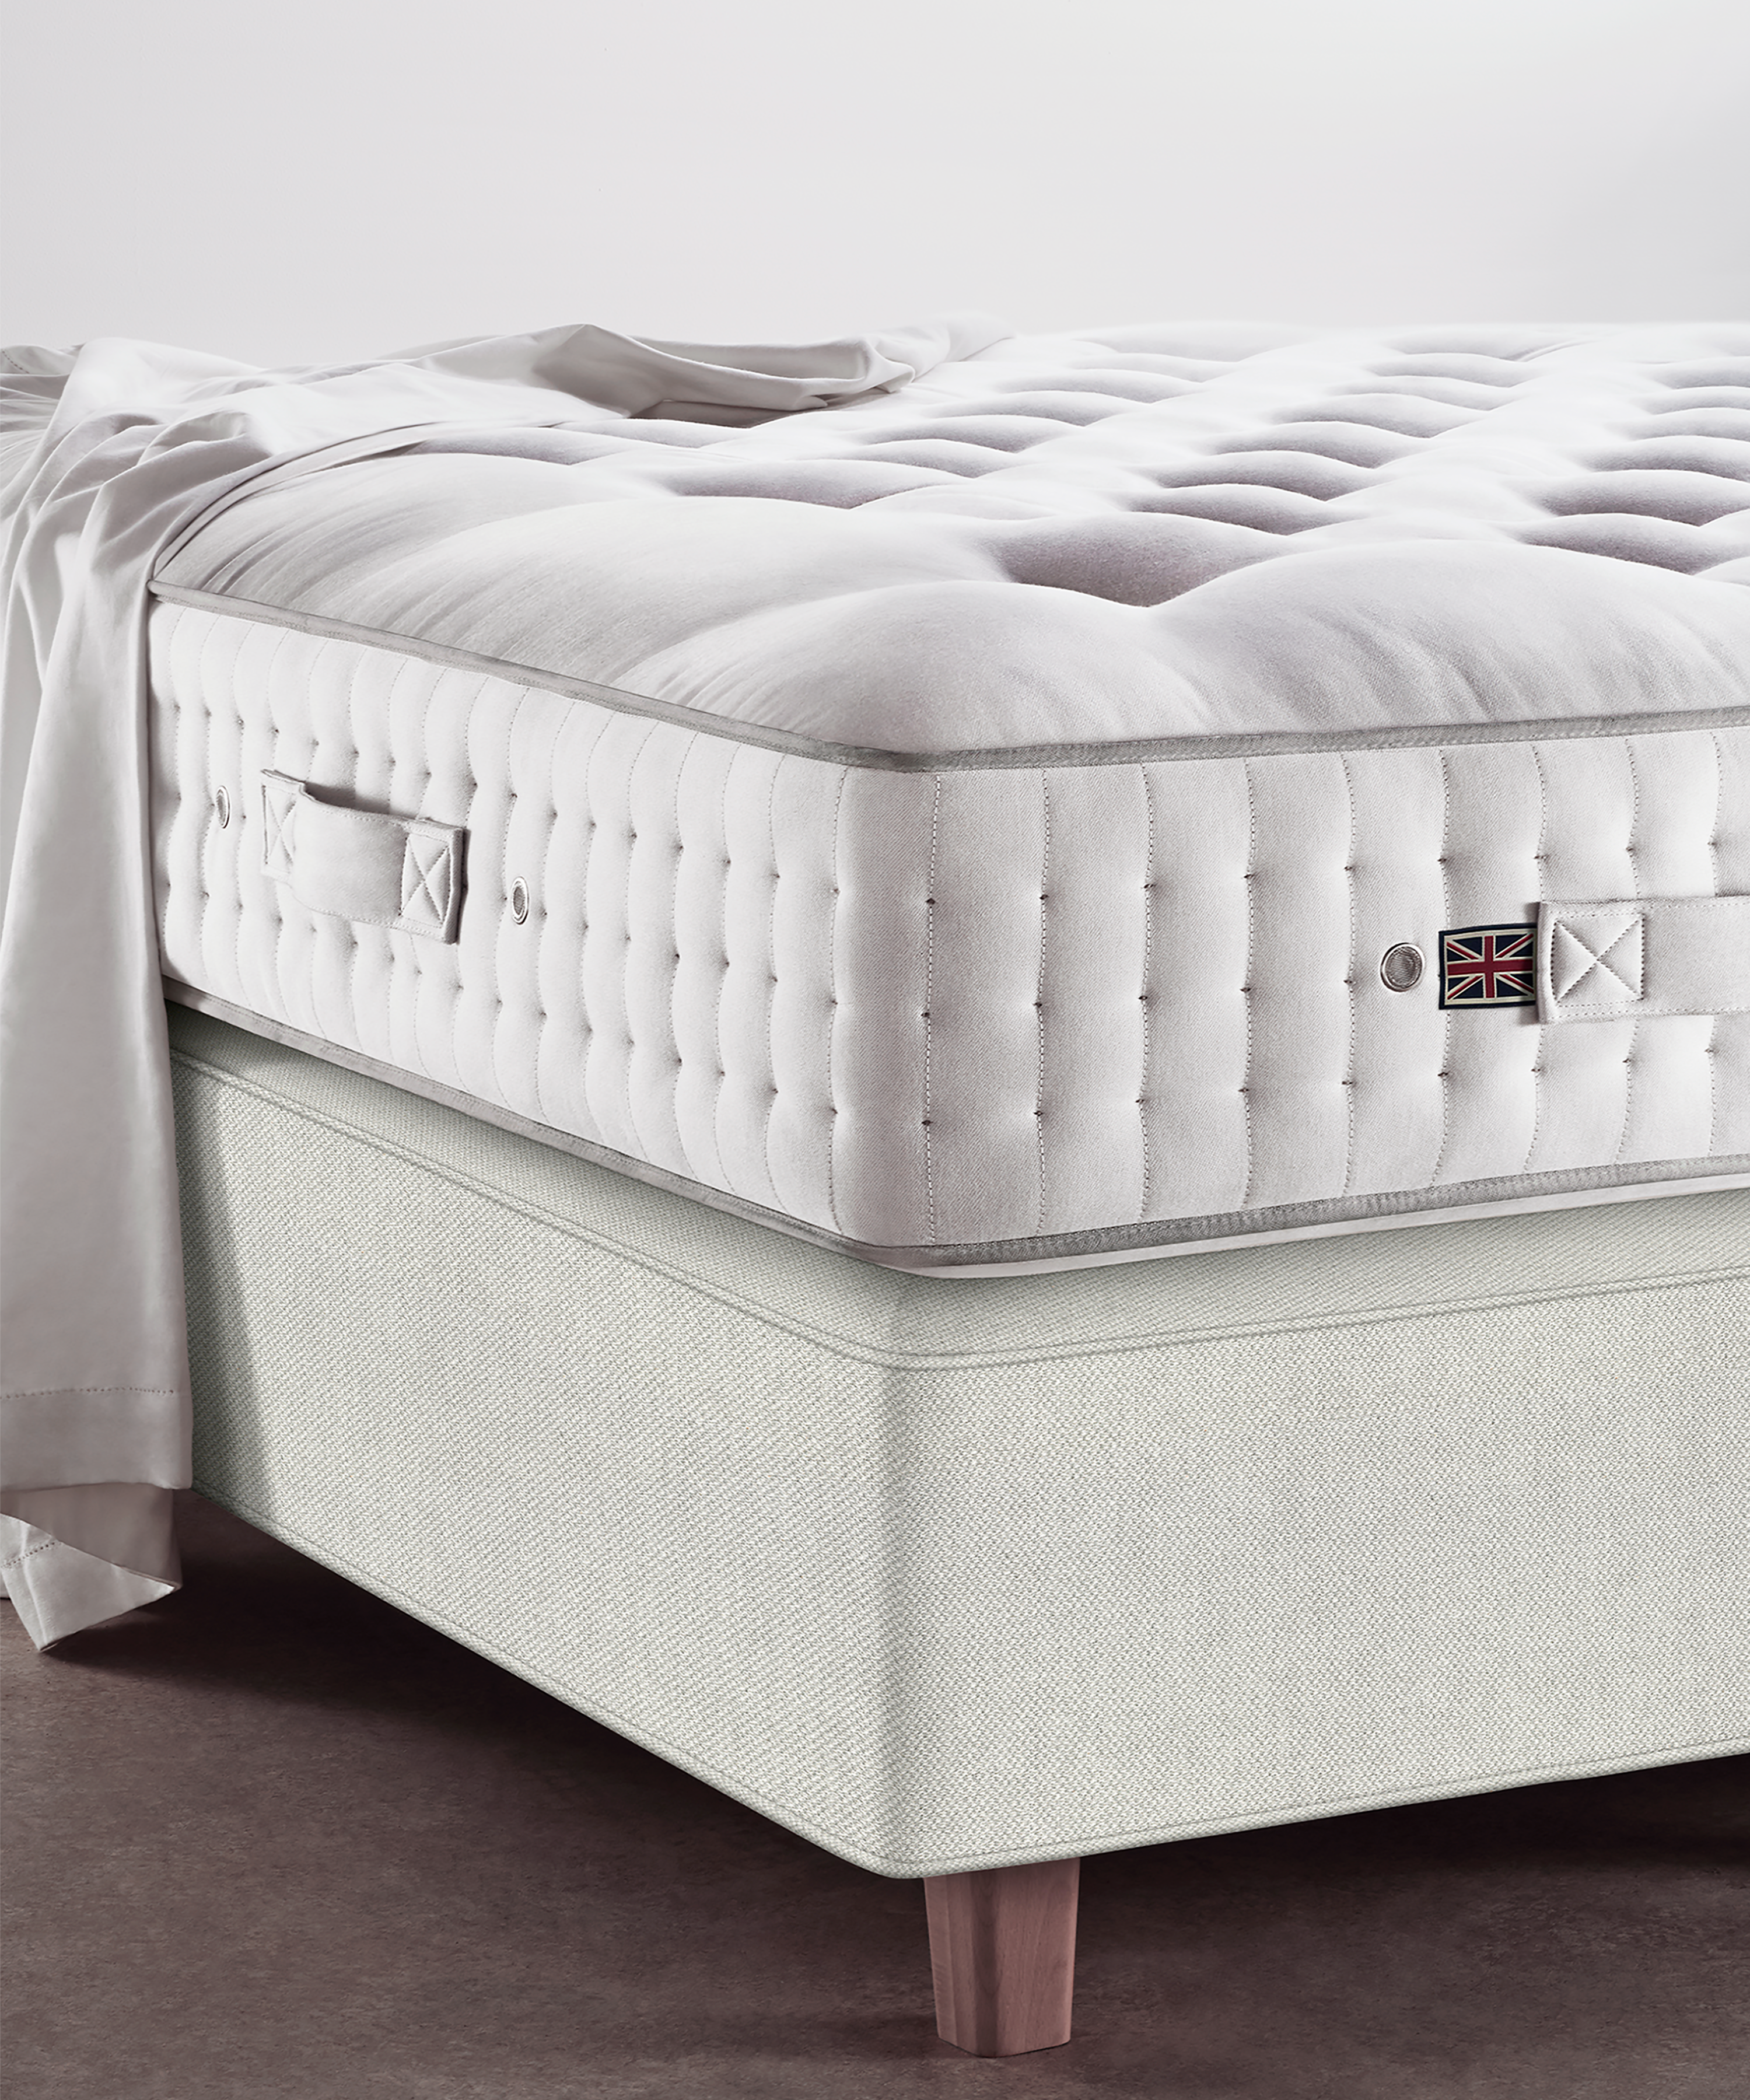 The Regent has 2,200 coils hand-nested into a single layer.  In addition to its British fleece wool, Shetland wool, and hand-teased horsehair, this mattress has silk and mohair fibers to give you additional luxury and healthful night's sleep.